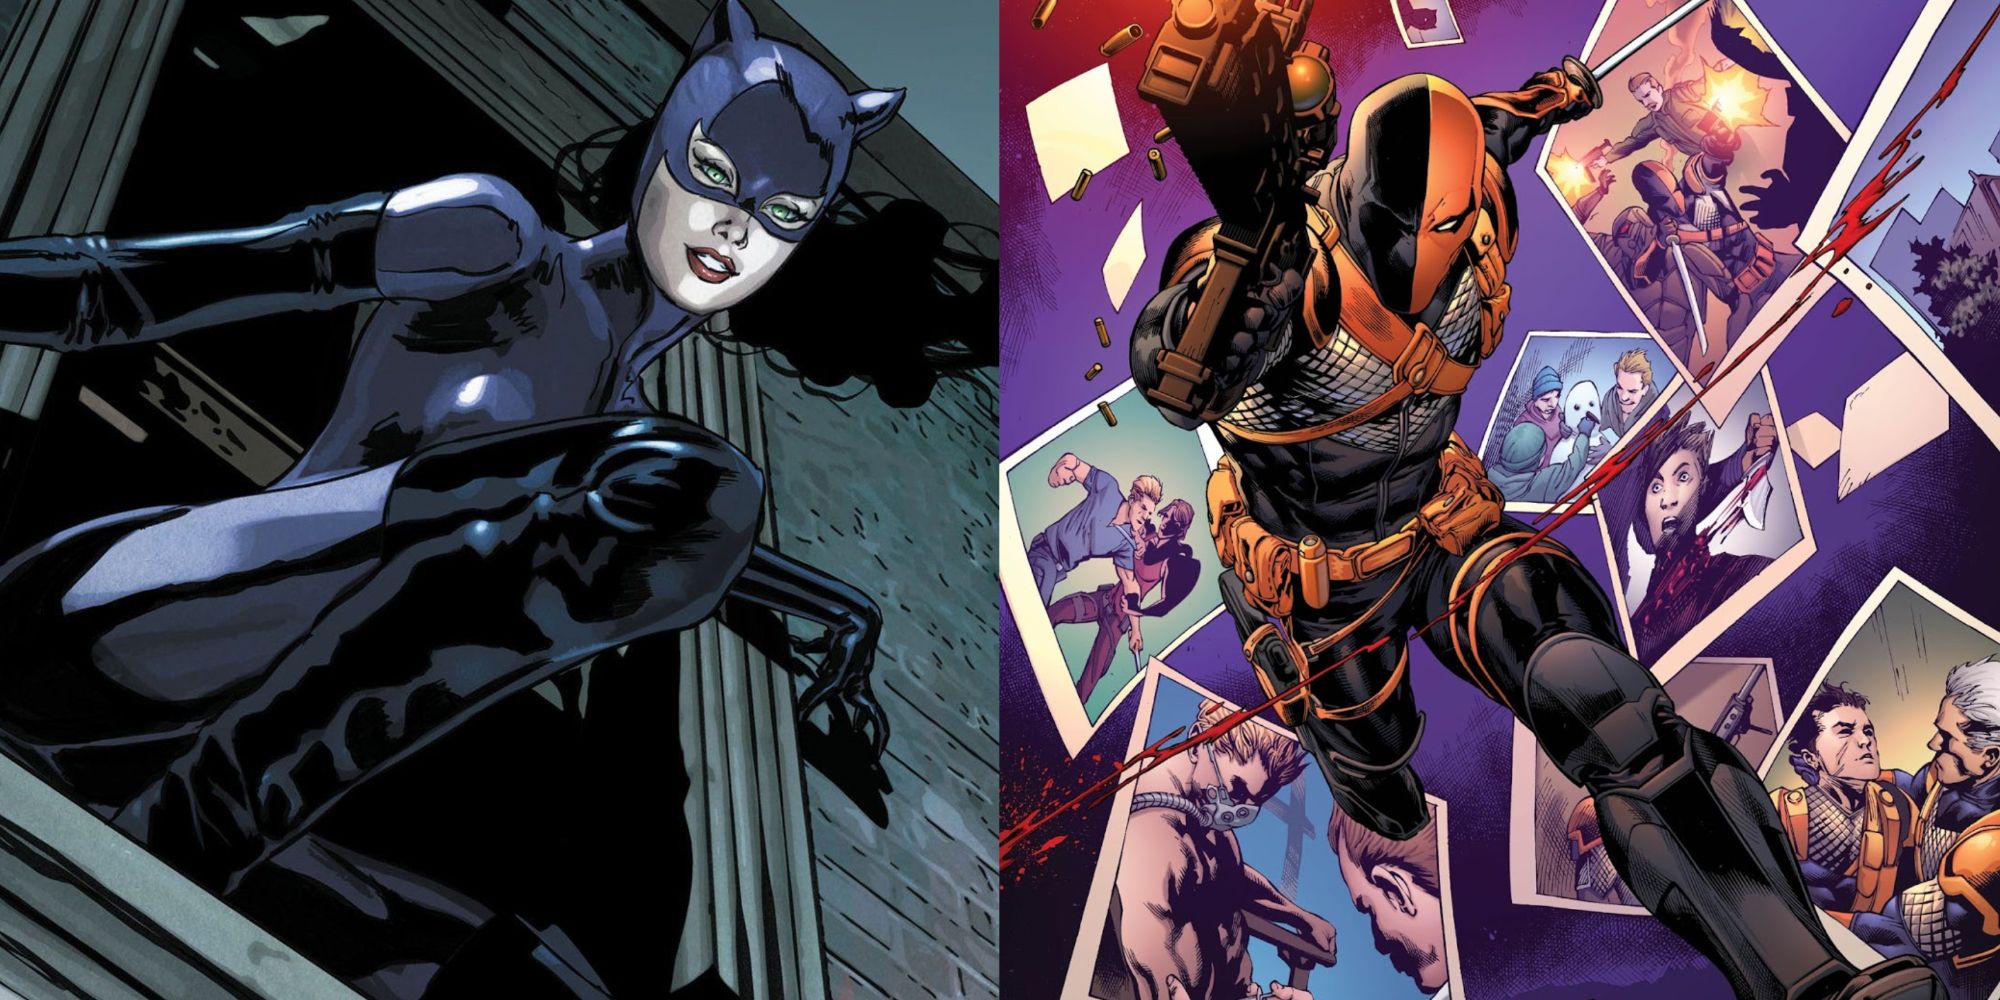 A split image of Catwoman (left) and Deathstroke (right)